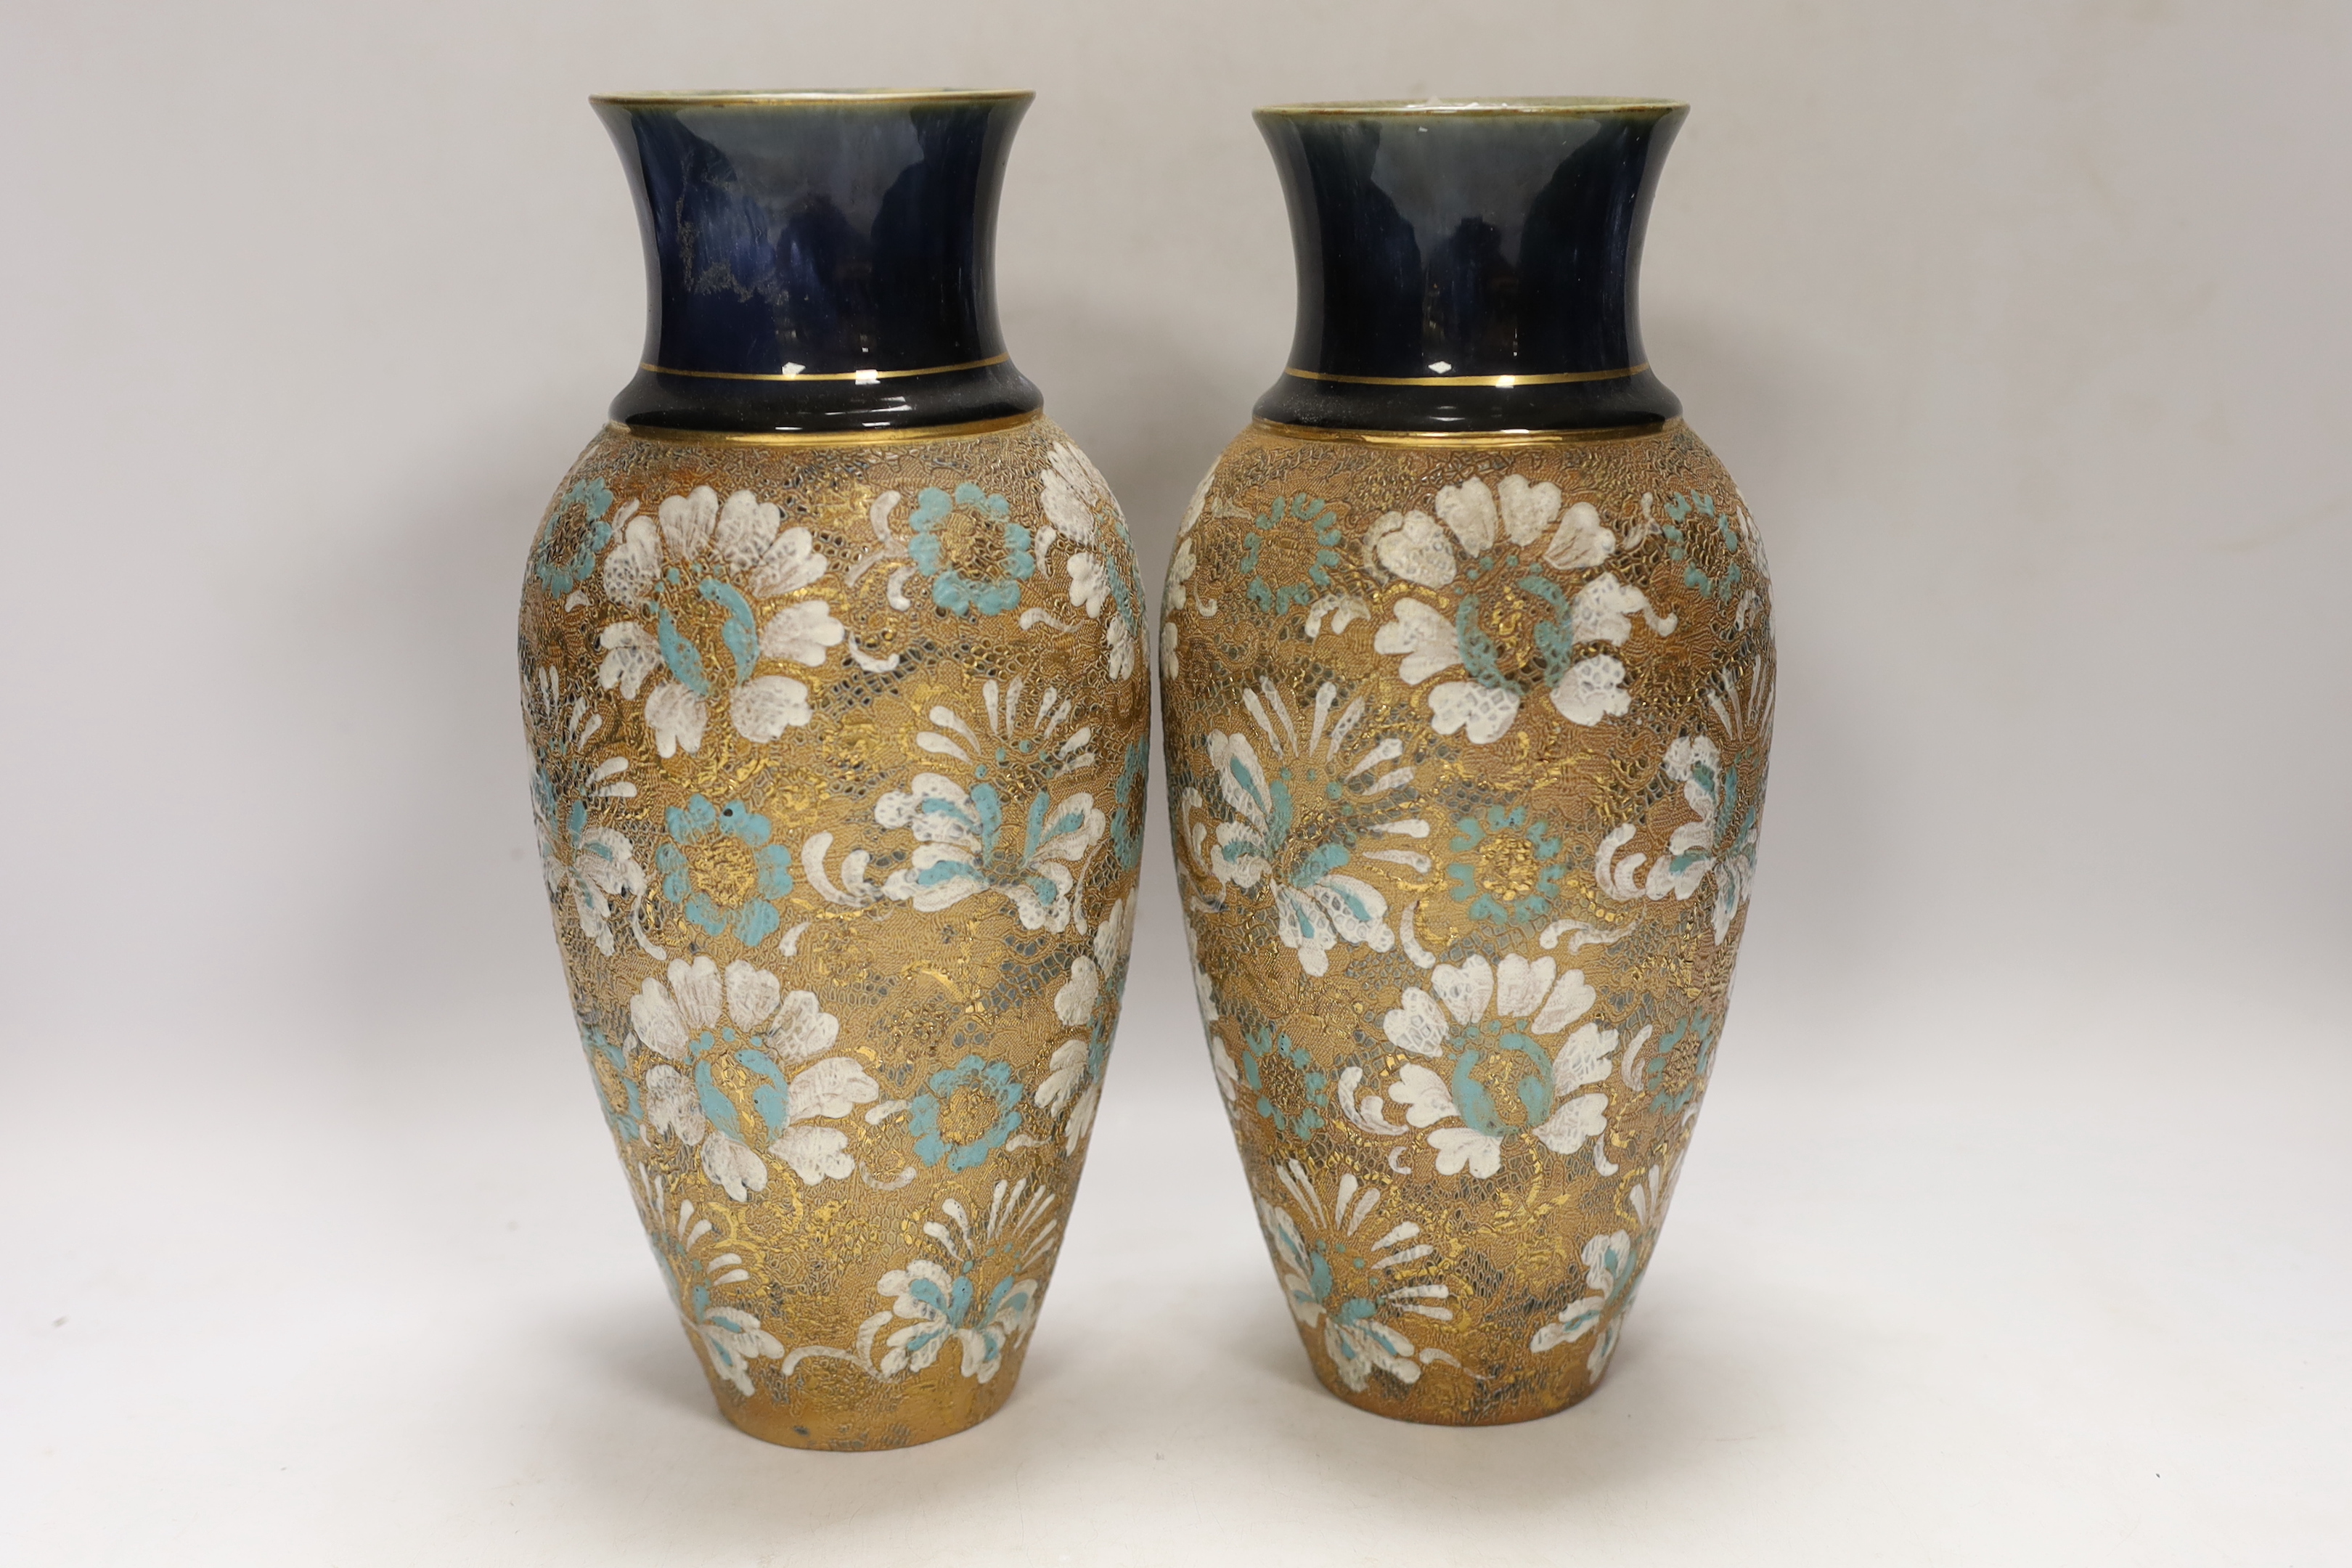 A pair of Royal Doulton Slaters stoneware vases, 28cm high